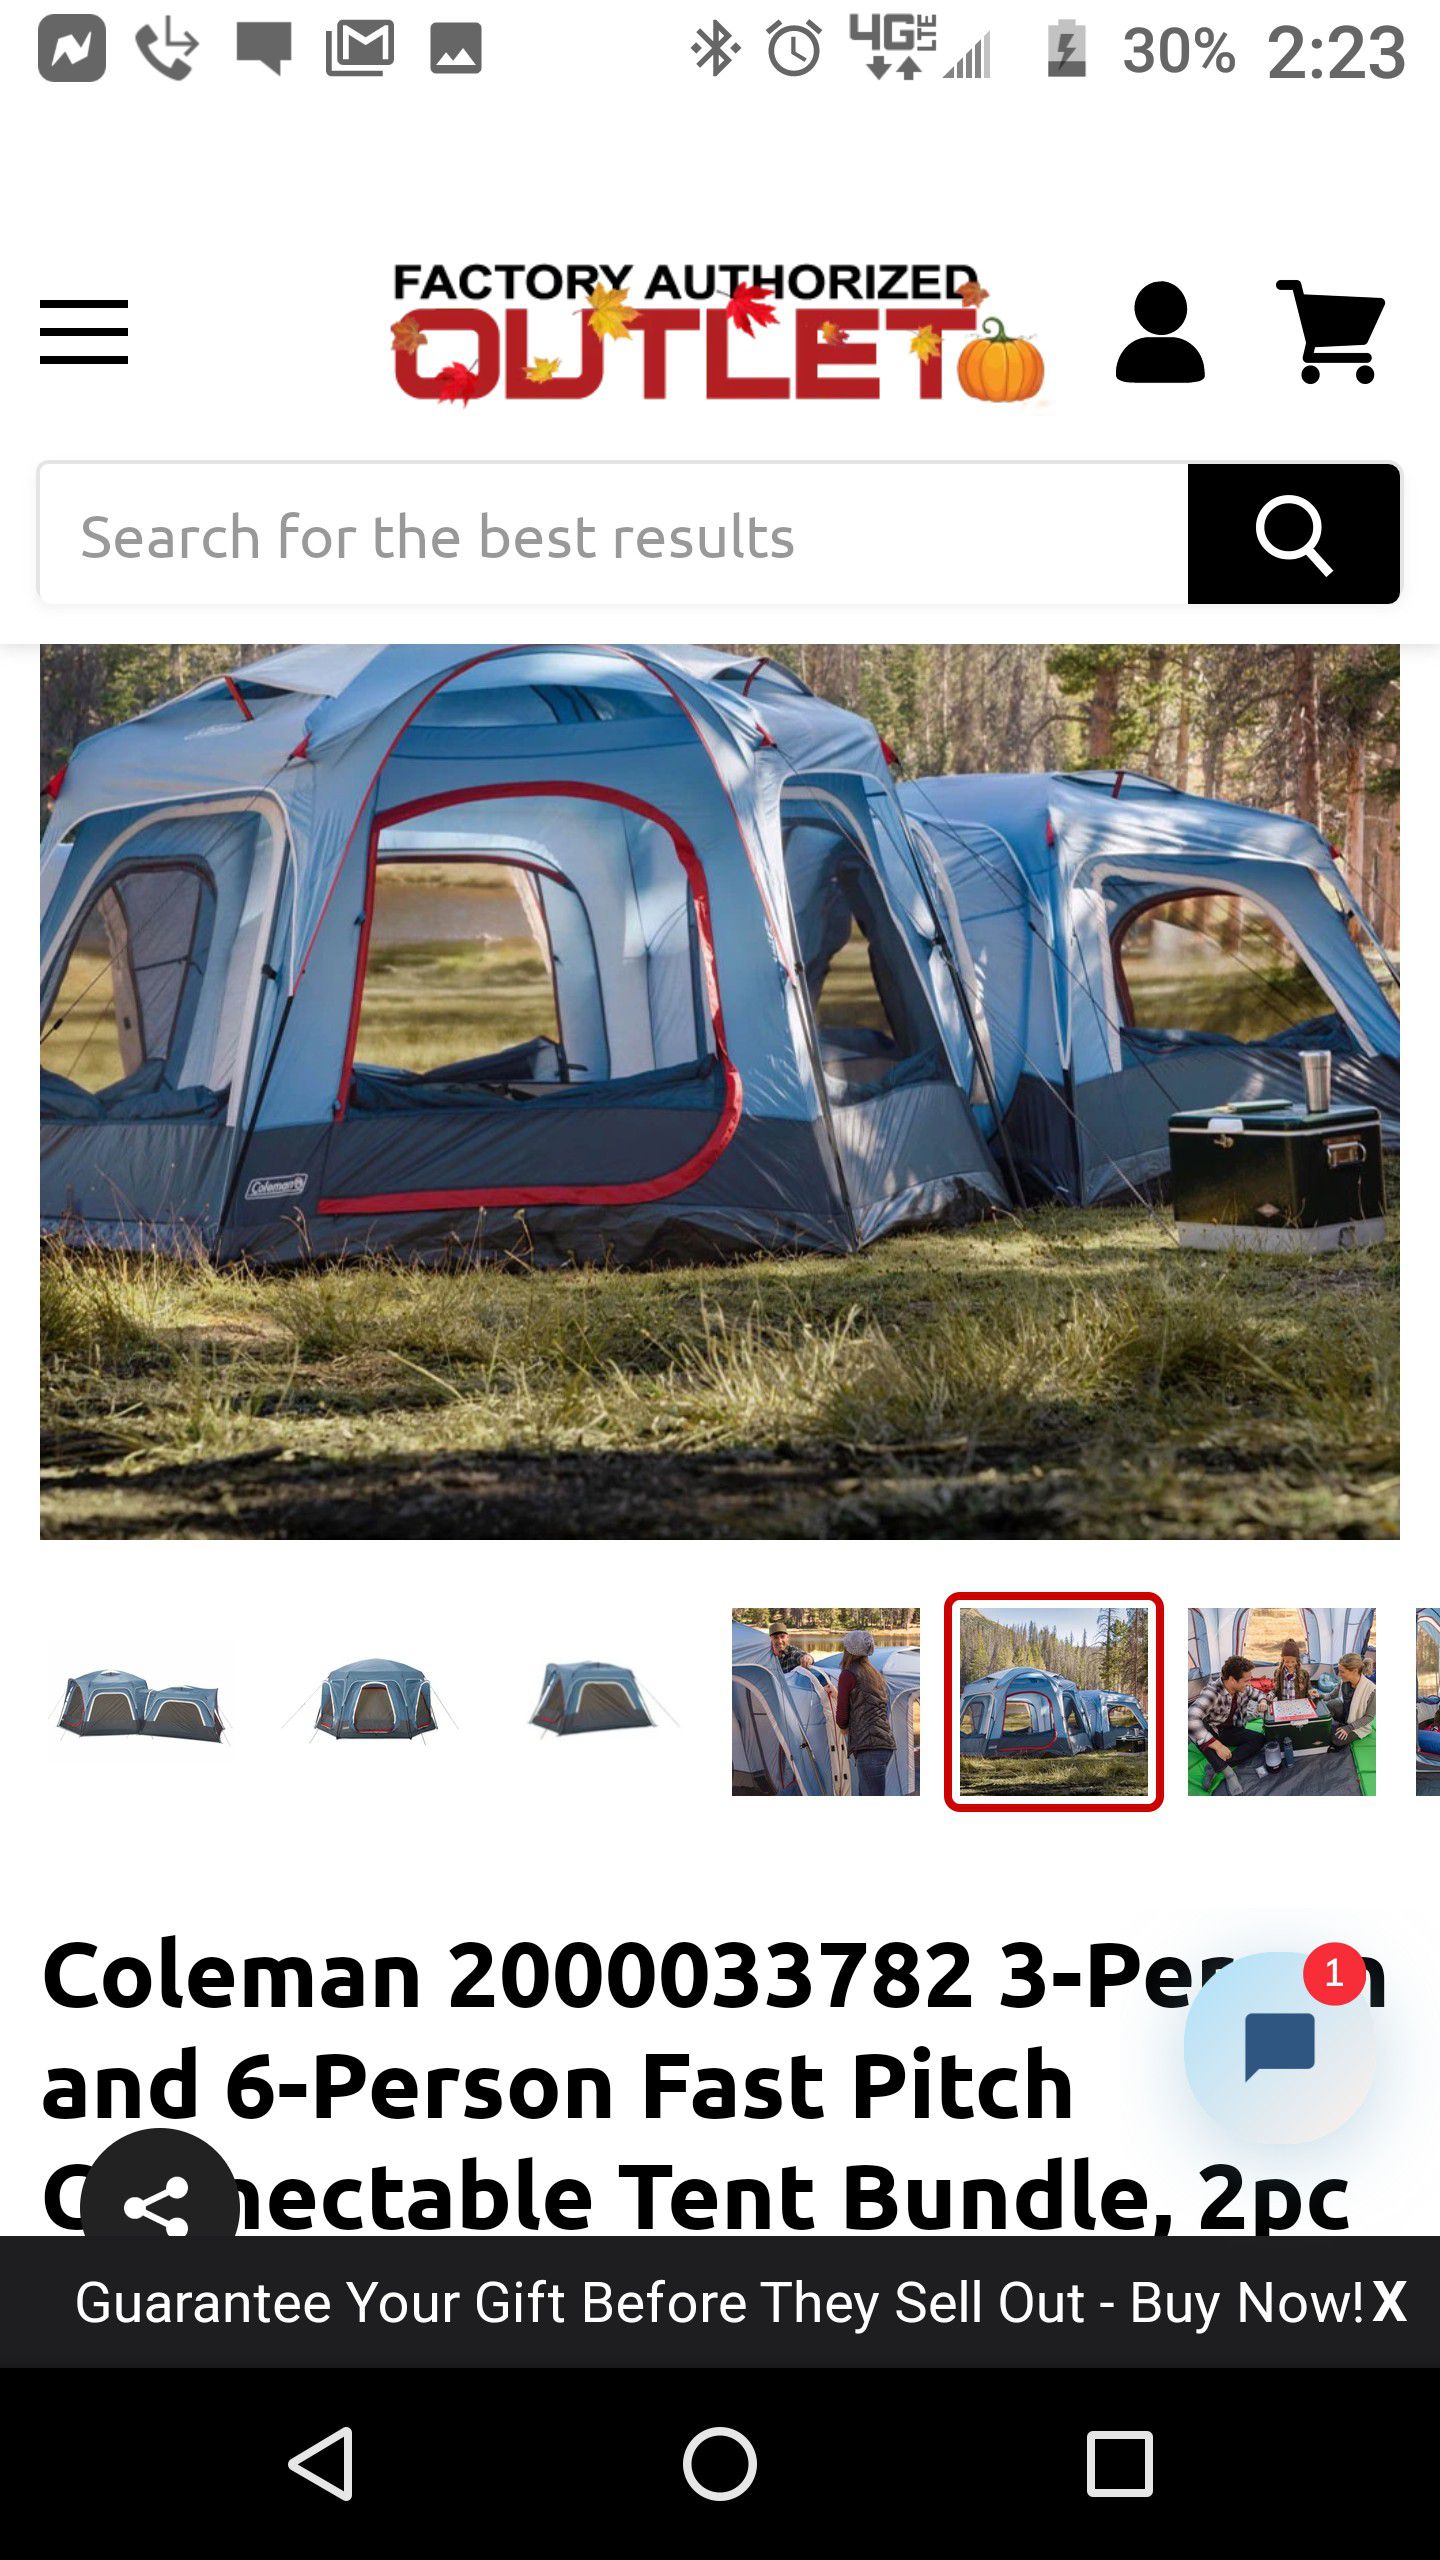 Photo Coleman Connectable 6 Person Fast Pitch Tent Buble